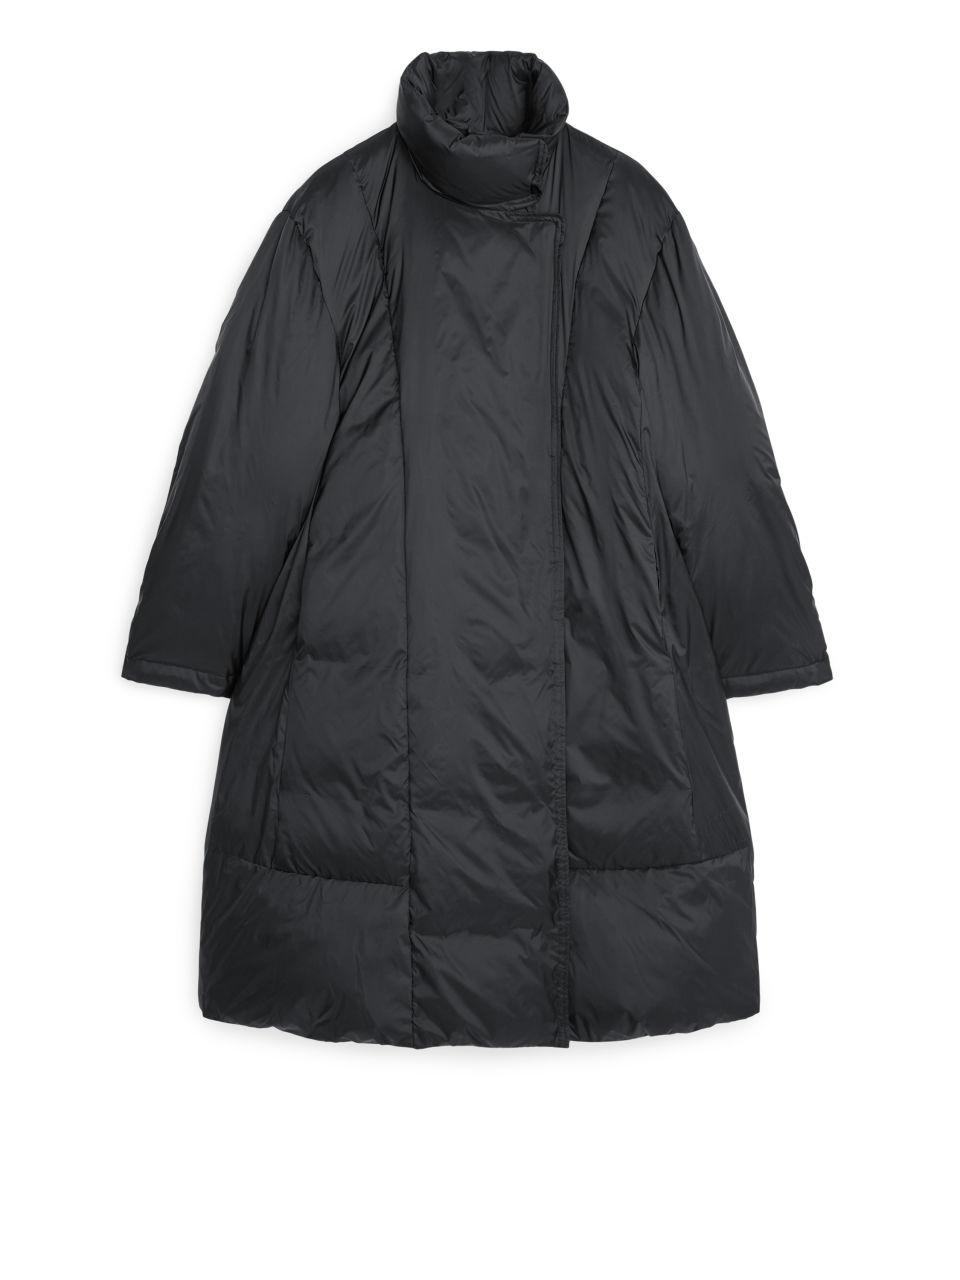 ARKET Synthetic A-line Down Puffer Coat in Black - Lyst